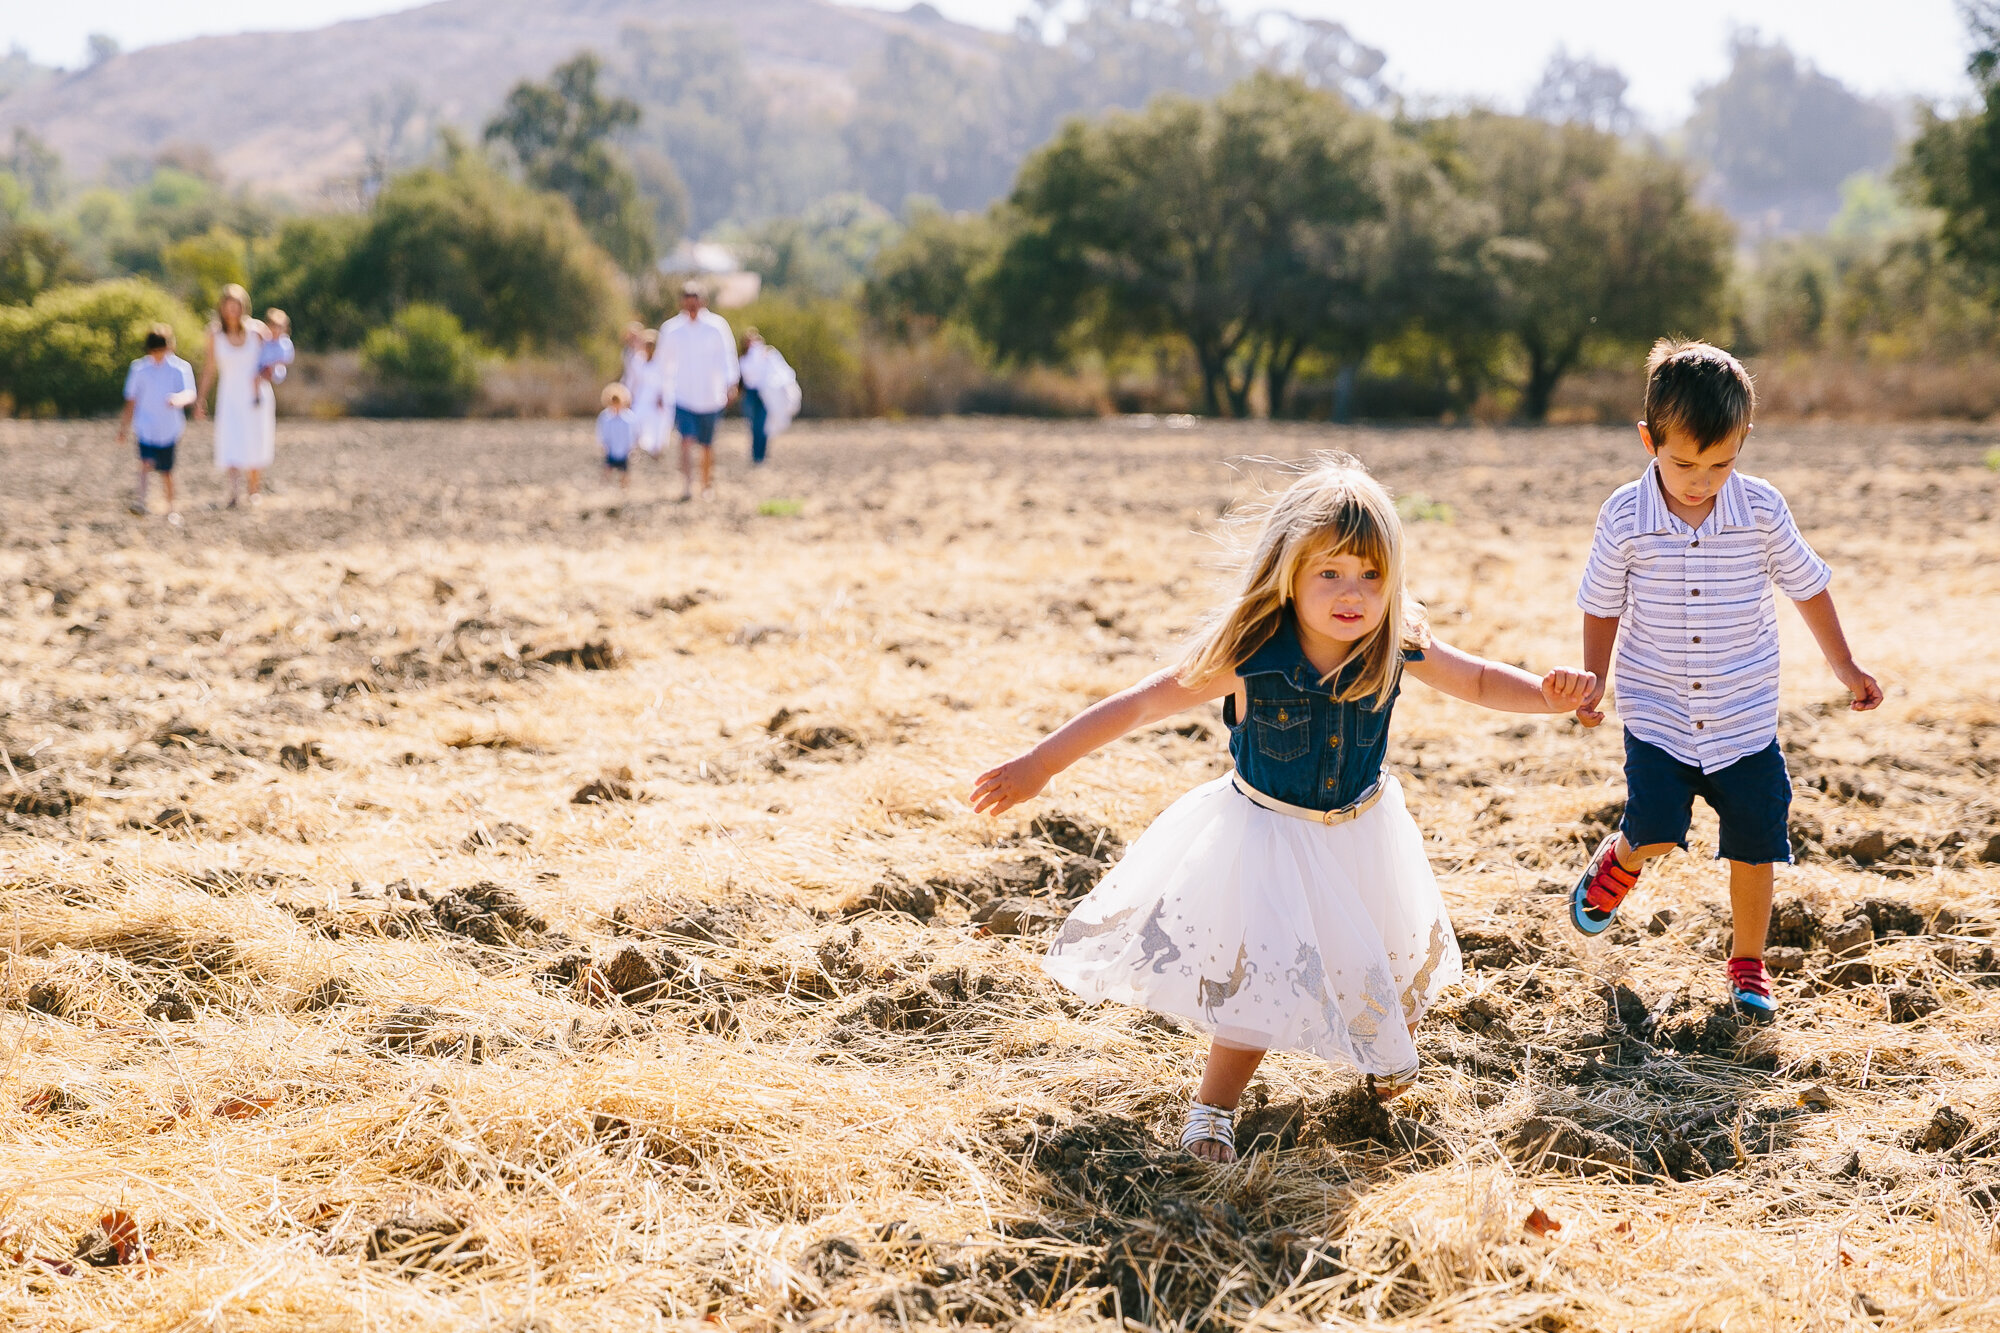 Los_Angeles_Family_Photography_Orange_County_Children_Babies_Field_Farm_Outdoors_Morning_Session_California_Girls_Boys_Kids_Photography-1168.jpg